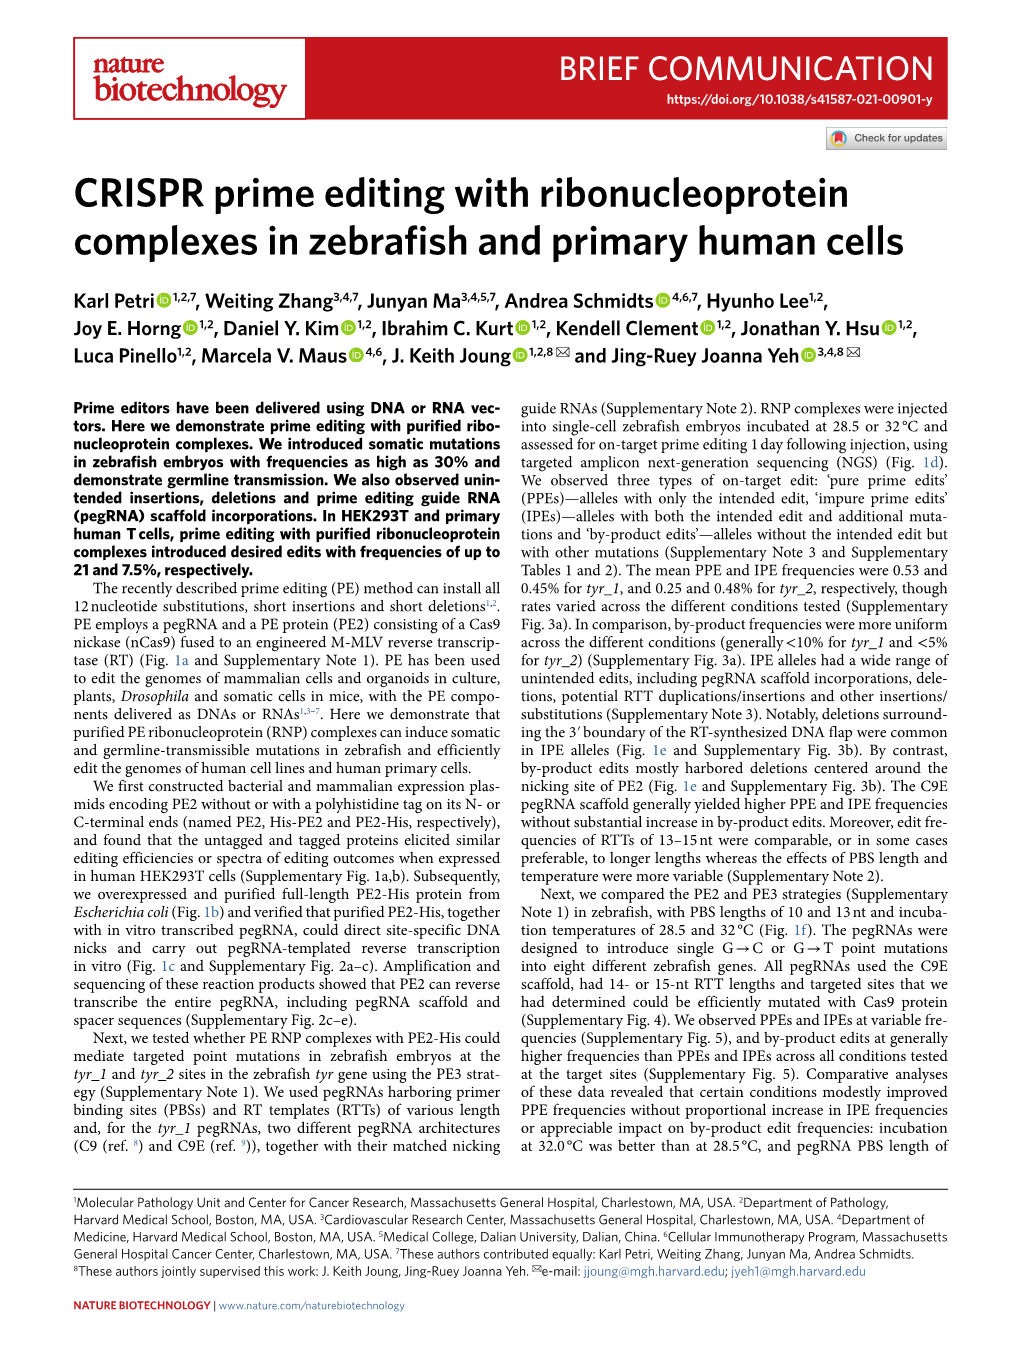 CRISPR Prime Editing with Ribonucleoprotein Complexes in Zebrafish and Primary Human Cells